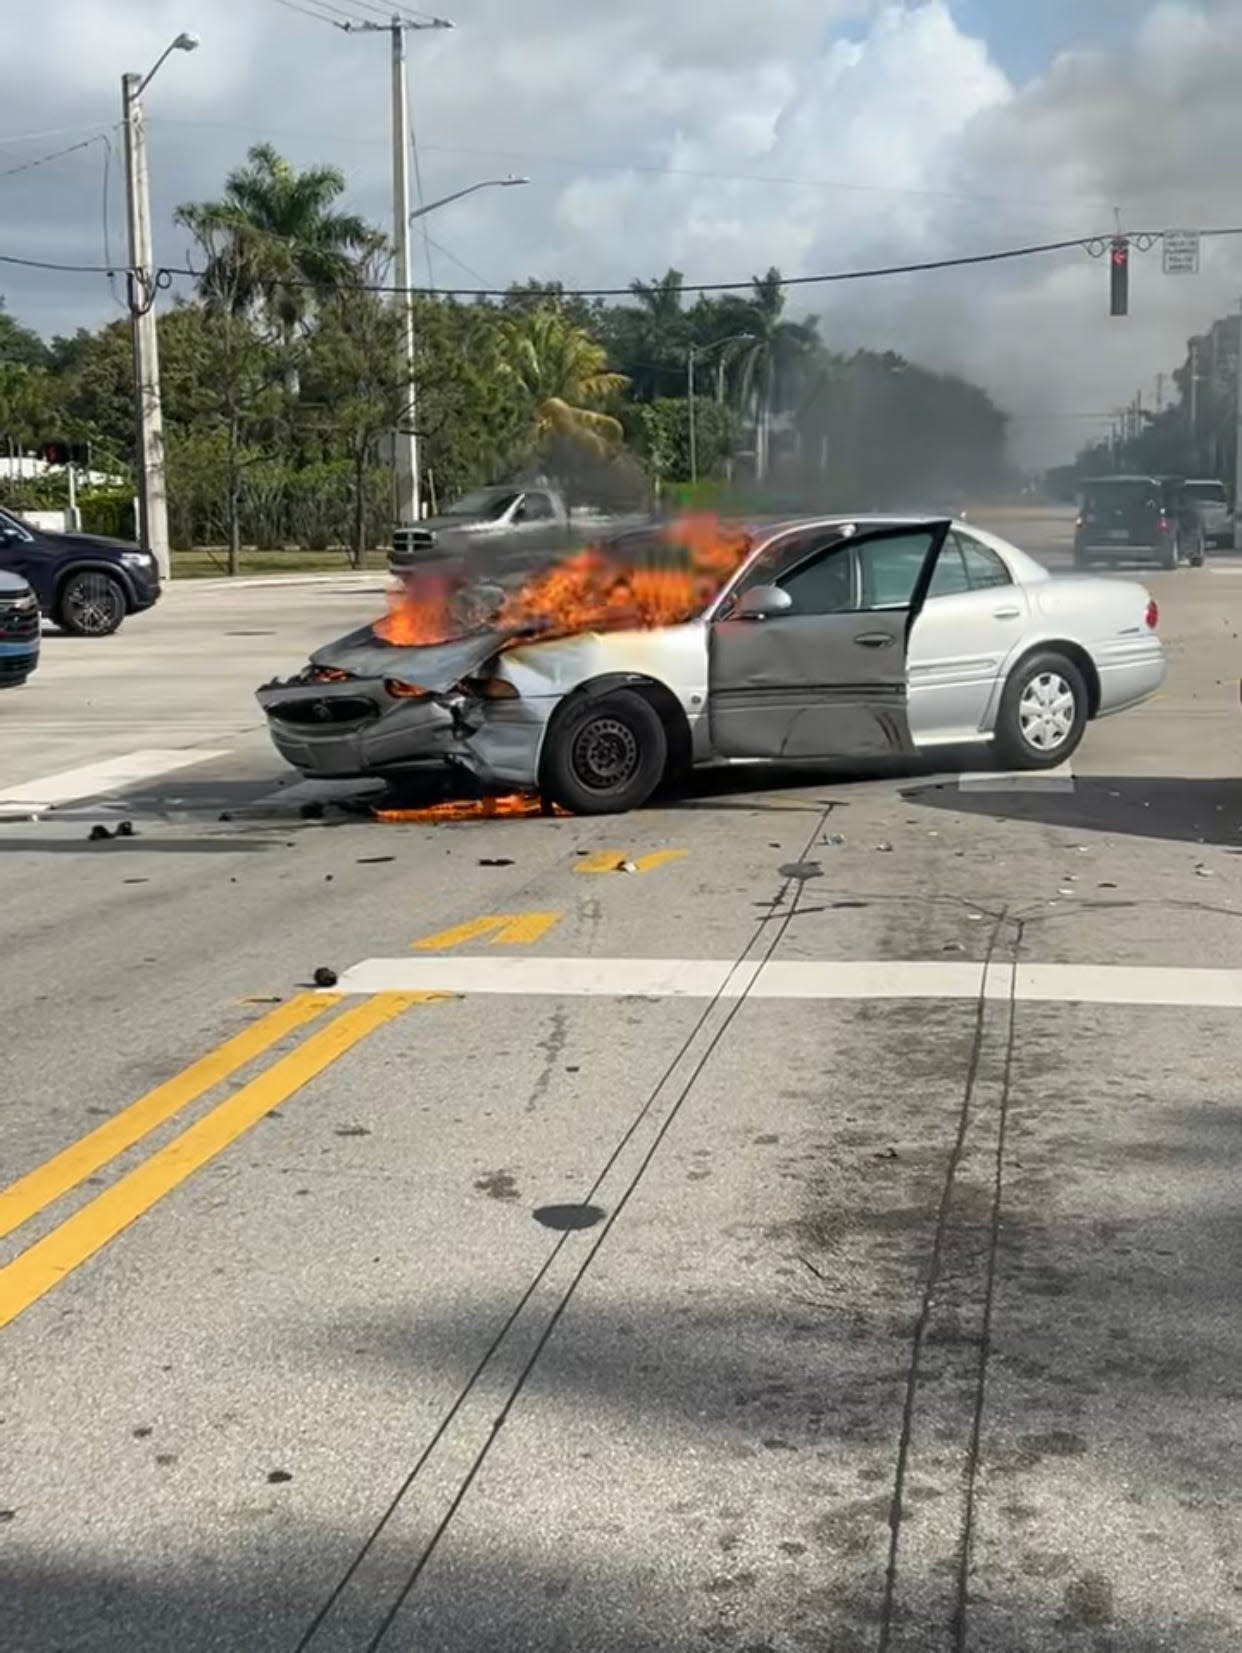 Leo Zupo pulled a woman from her burning car in early April after a wreck unfolded near the intersection of Gateway Boulevard and Lawrence Road in Boynton Beach.